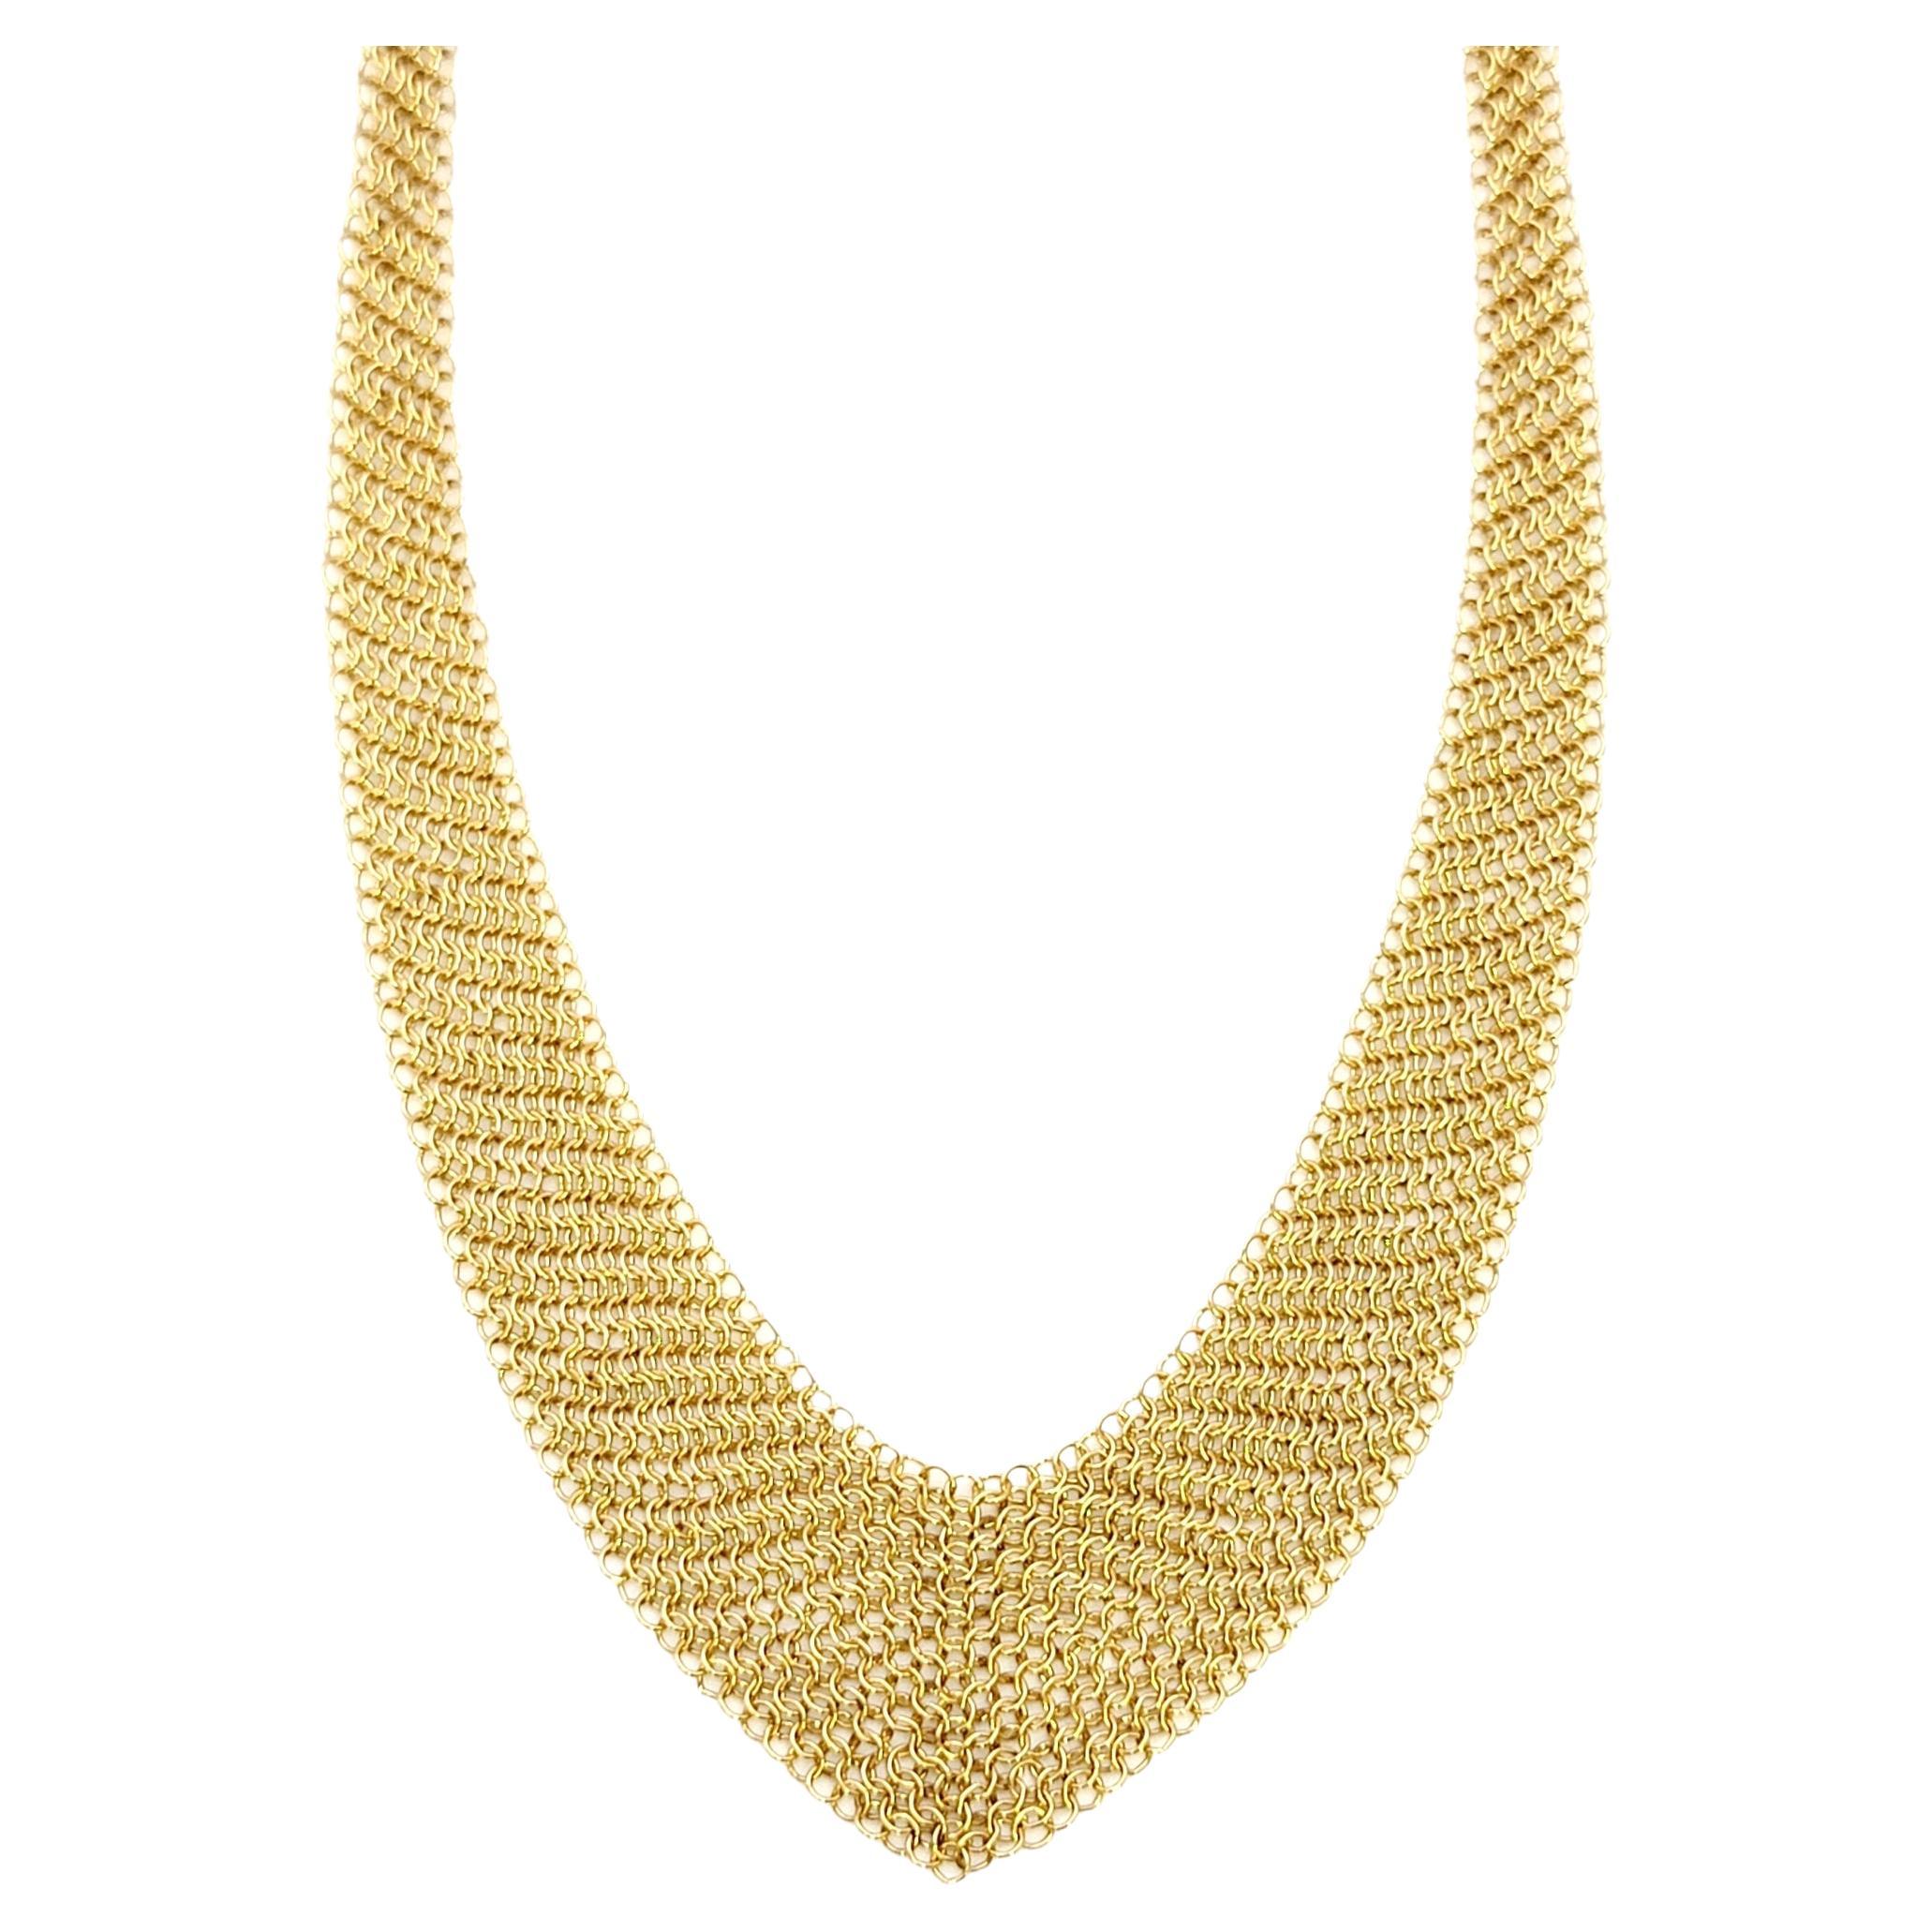 Elsa Peretti for Tiffany & Co., collier en maille en or jaune 18 carats, taille S